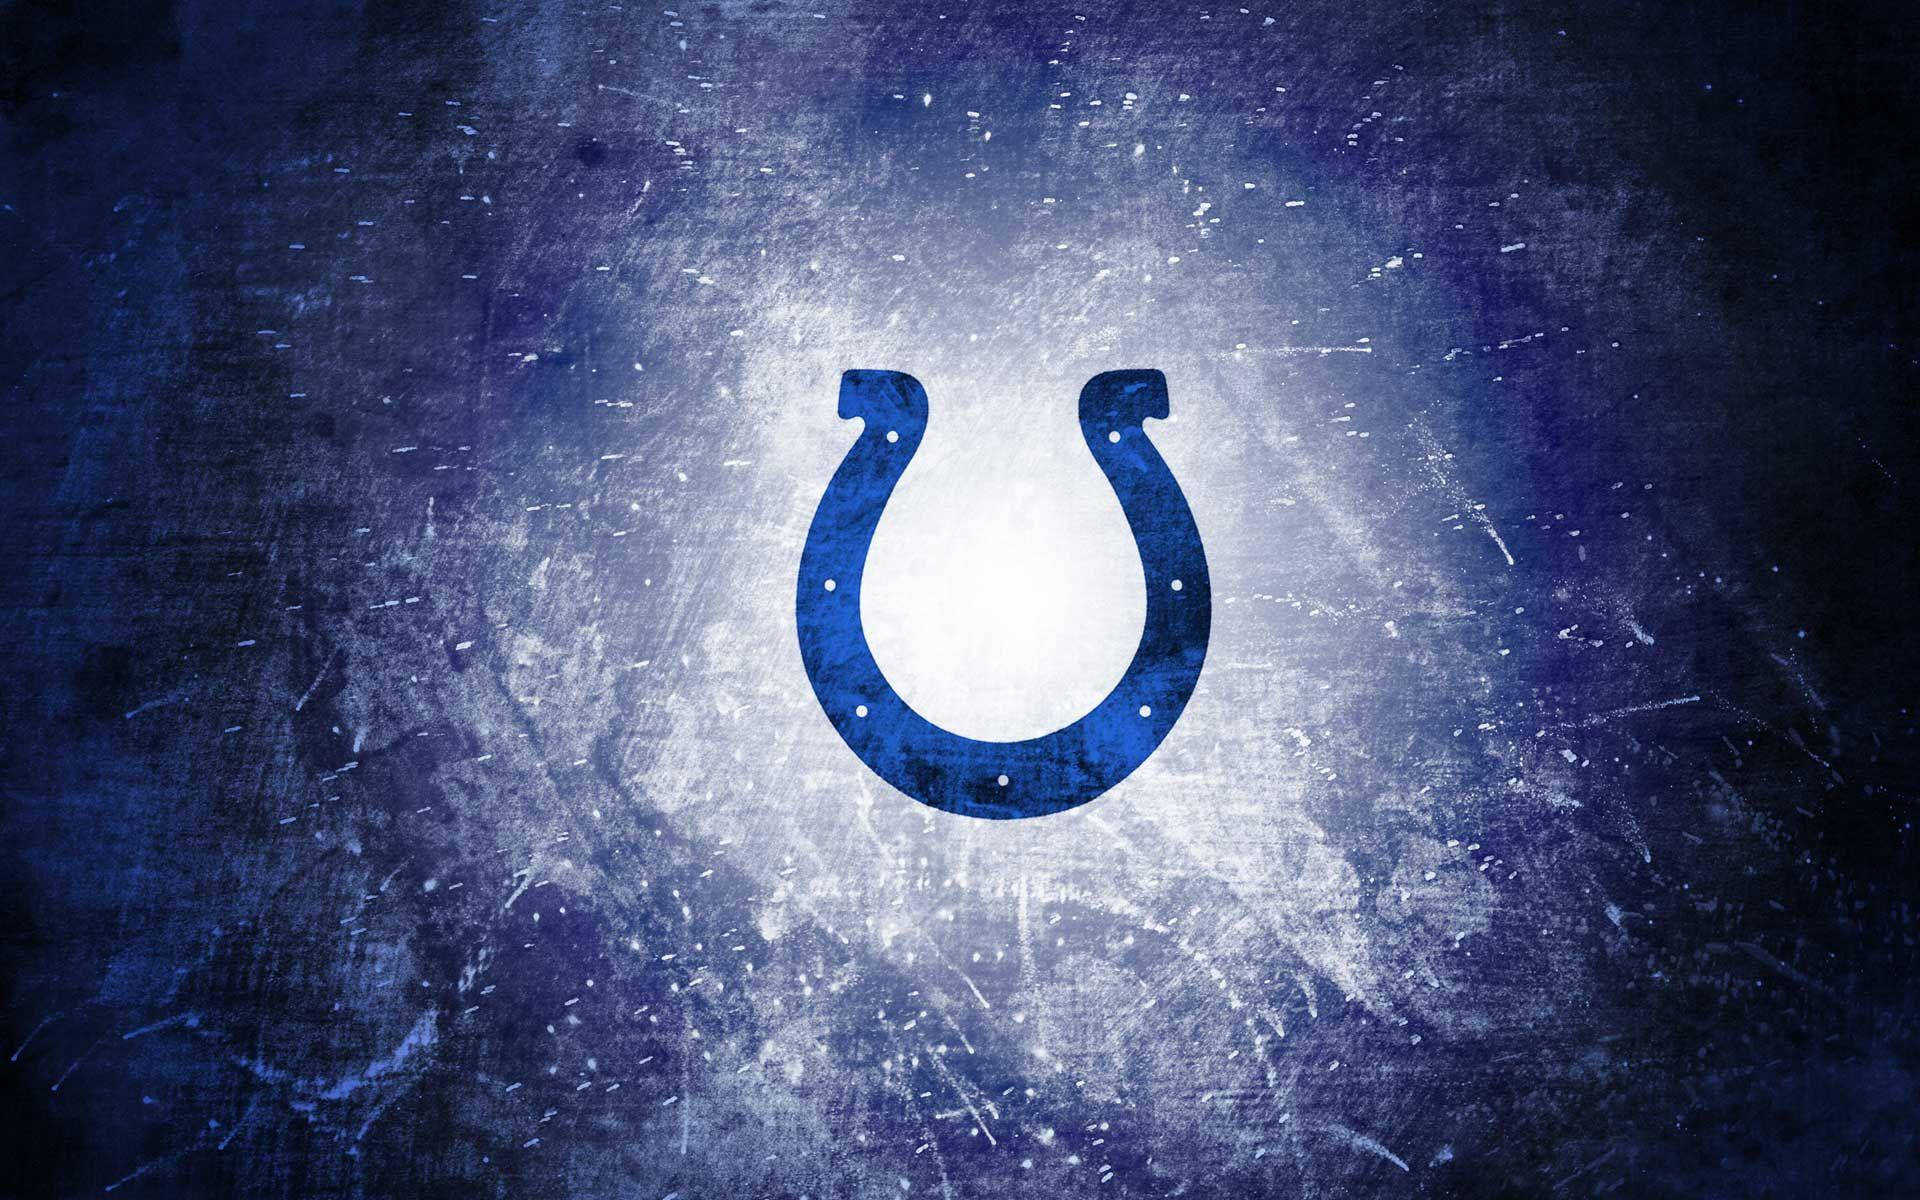 Indianapoliscolts Hufeisen. Wallpaper